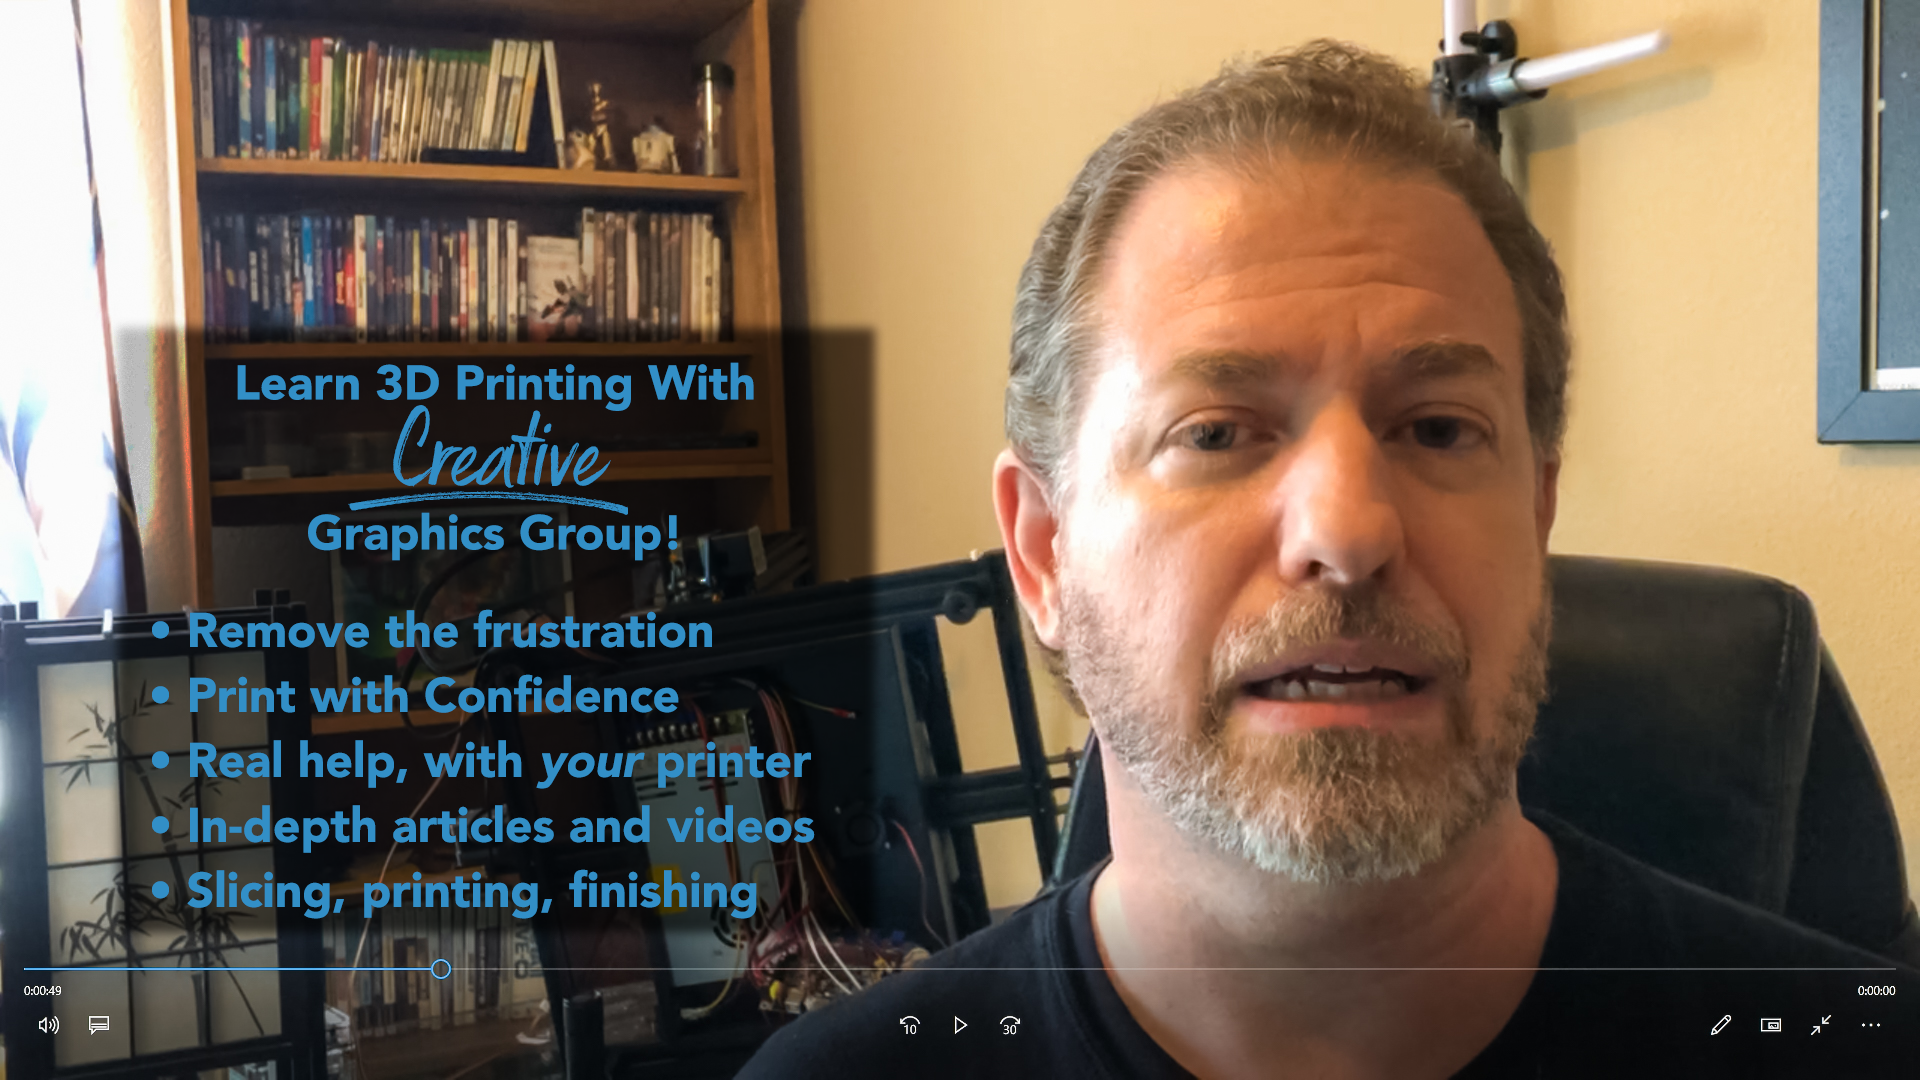 Learn 3D Printing with Creative Graphics Group